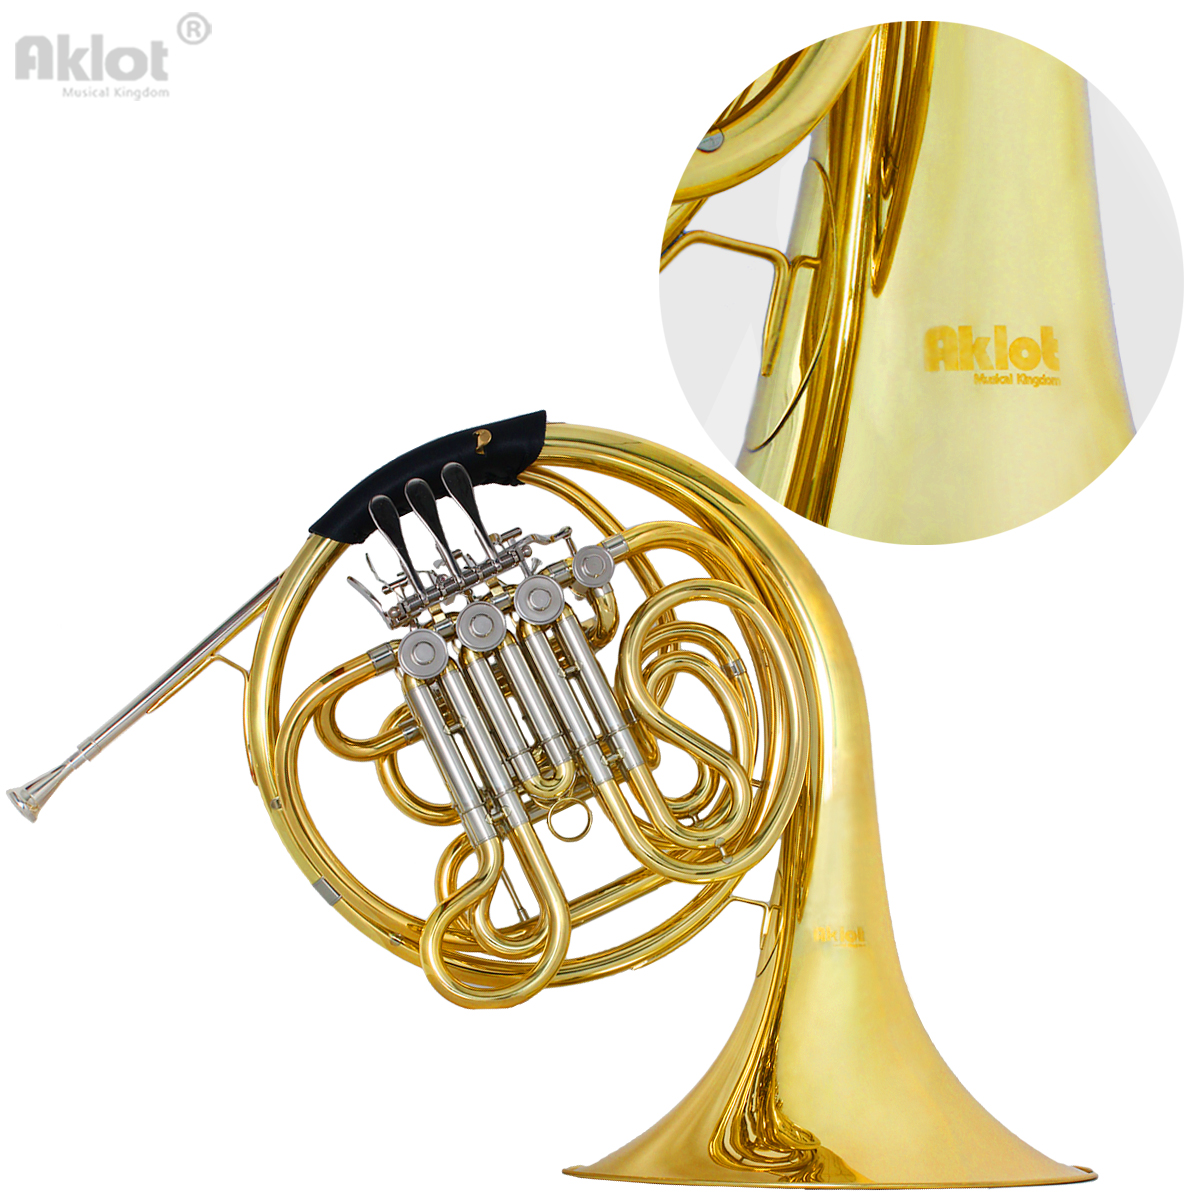 EFH-480 Eastar Double French Horn Key of F/Bb Standard 4-Key for Students Beginners Adults with Hard Case Tuner Mouthpiece Gloves Valve Oil and Cleaning Kit 